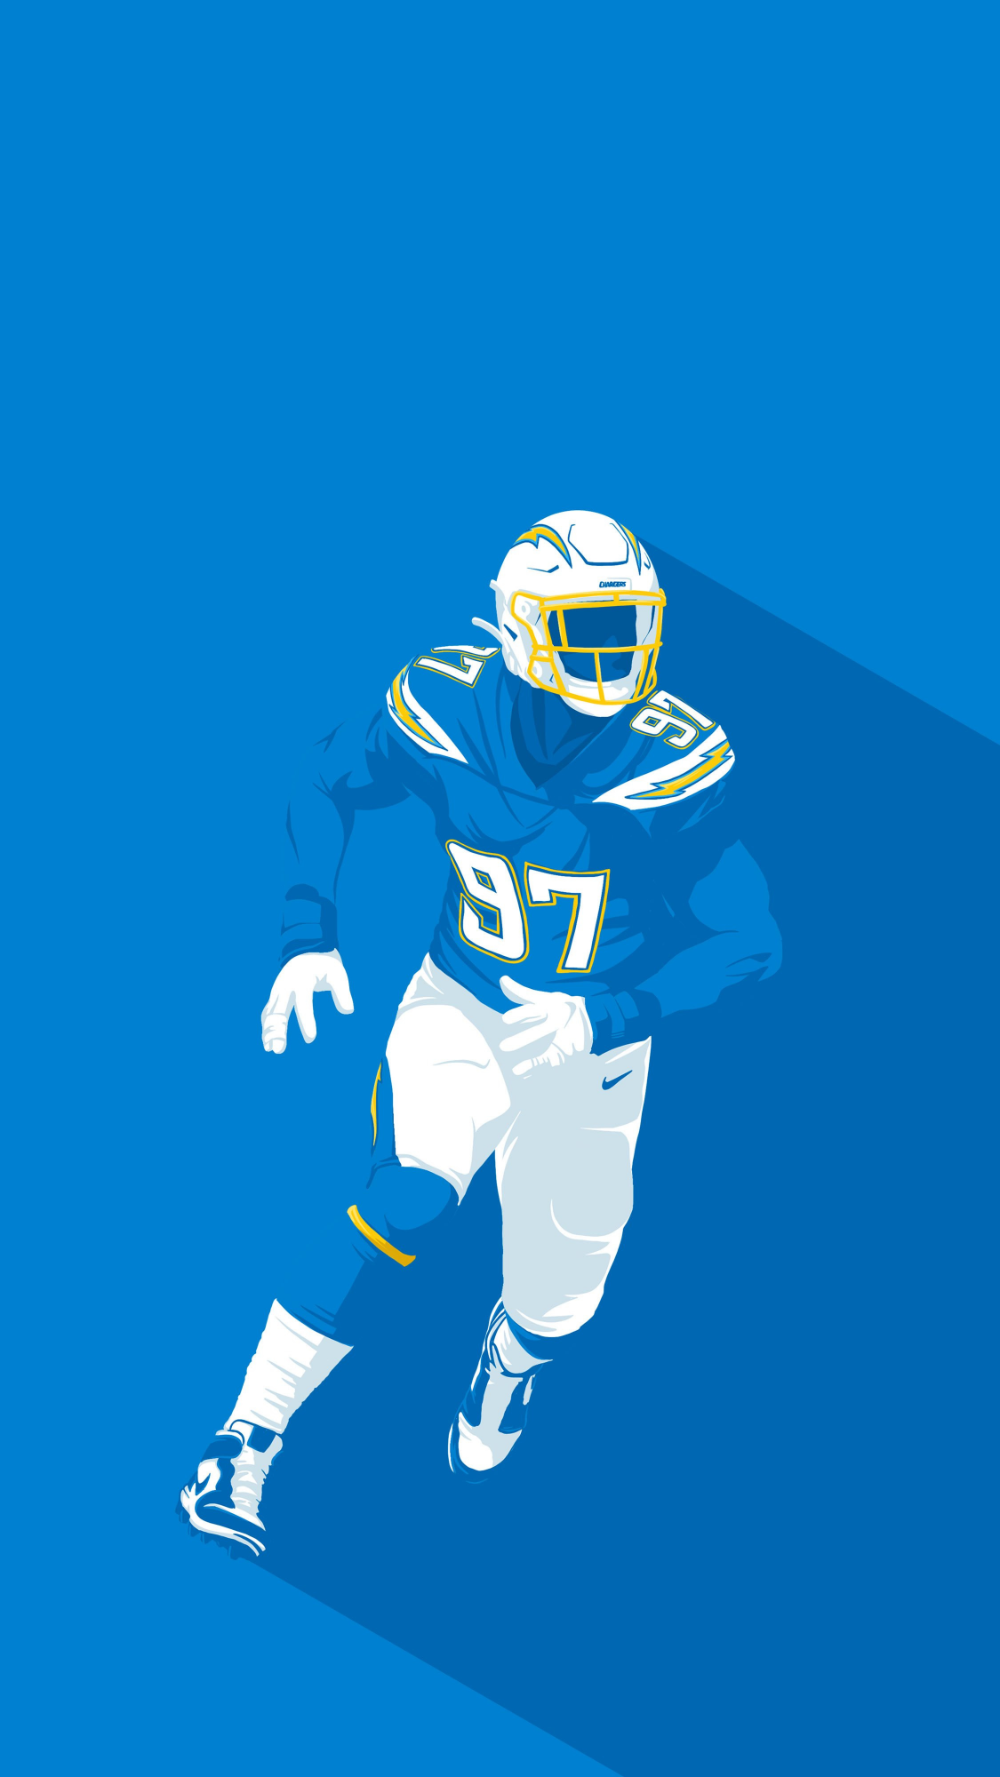 Chargers Wallpaper. Los Angeles Chargers.com. Nfl football art, Los angeles chargers logo, Chargers football